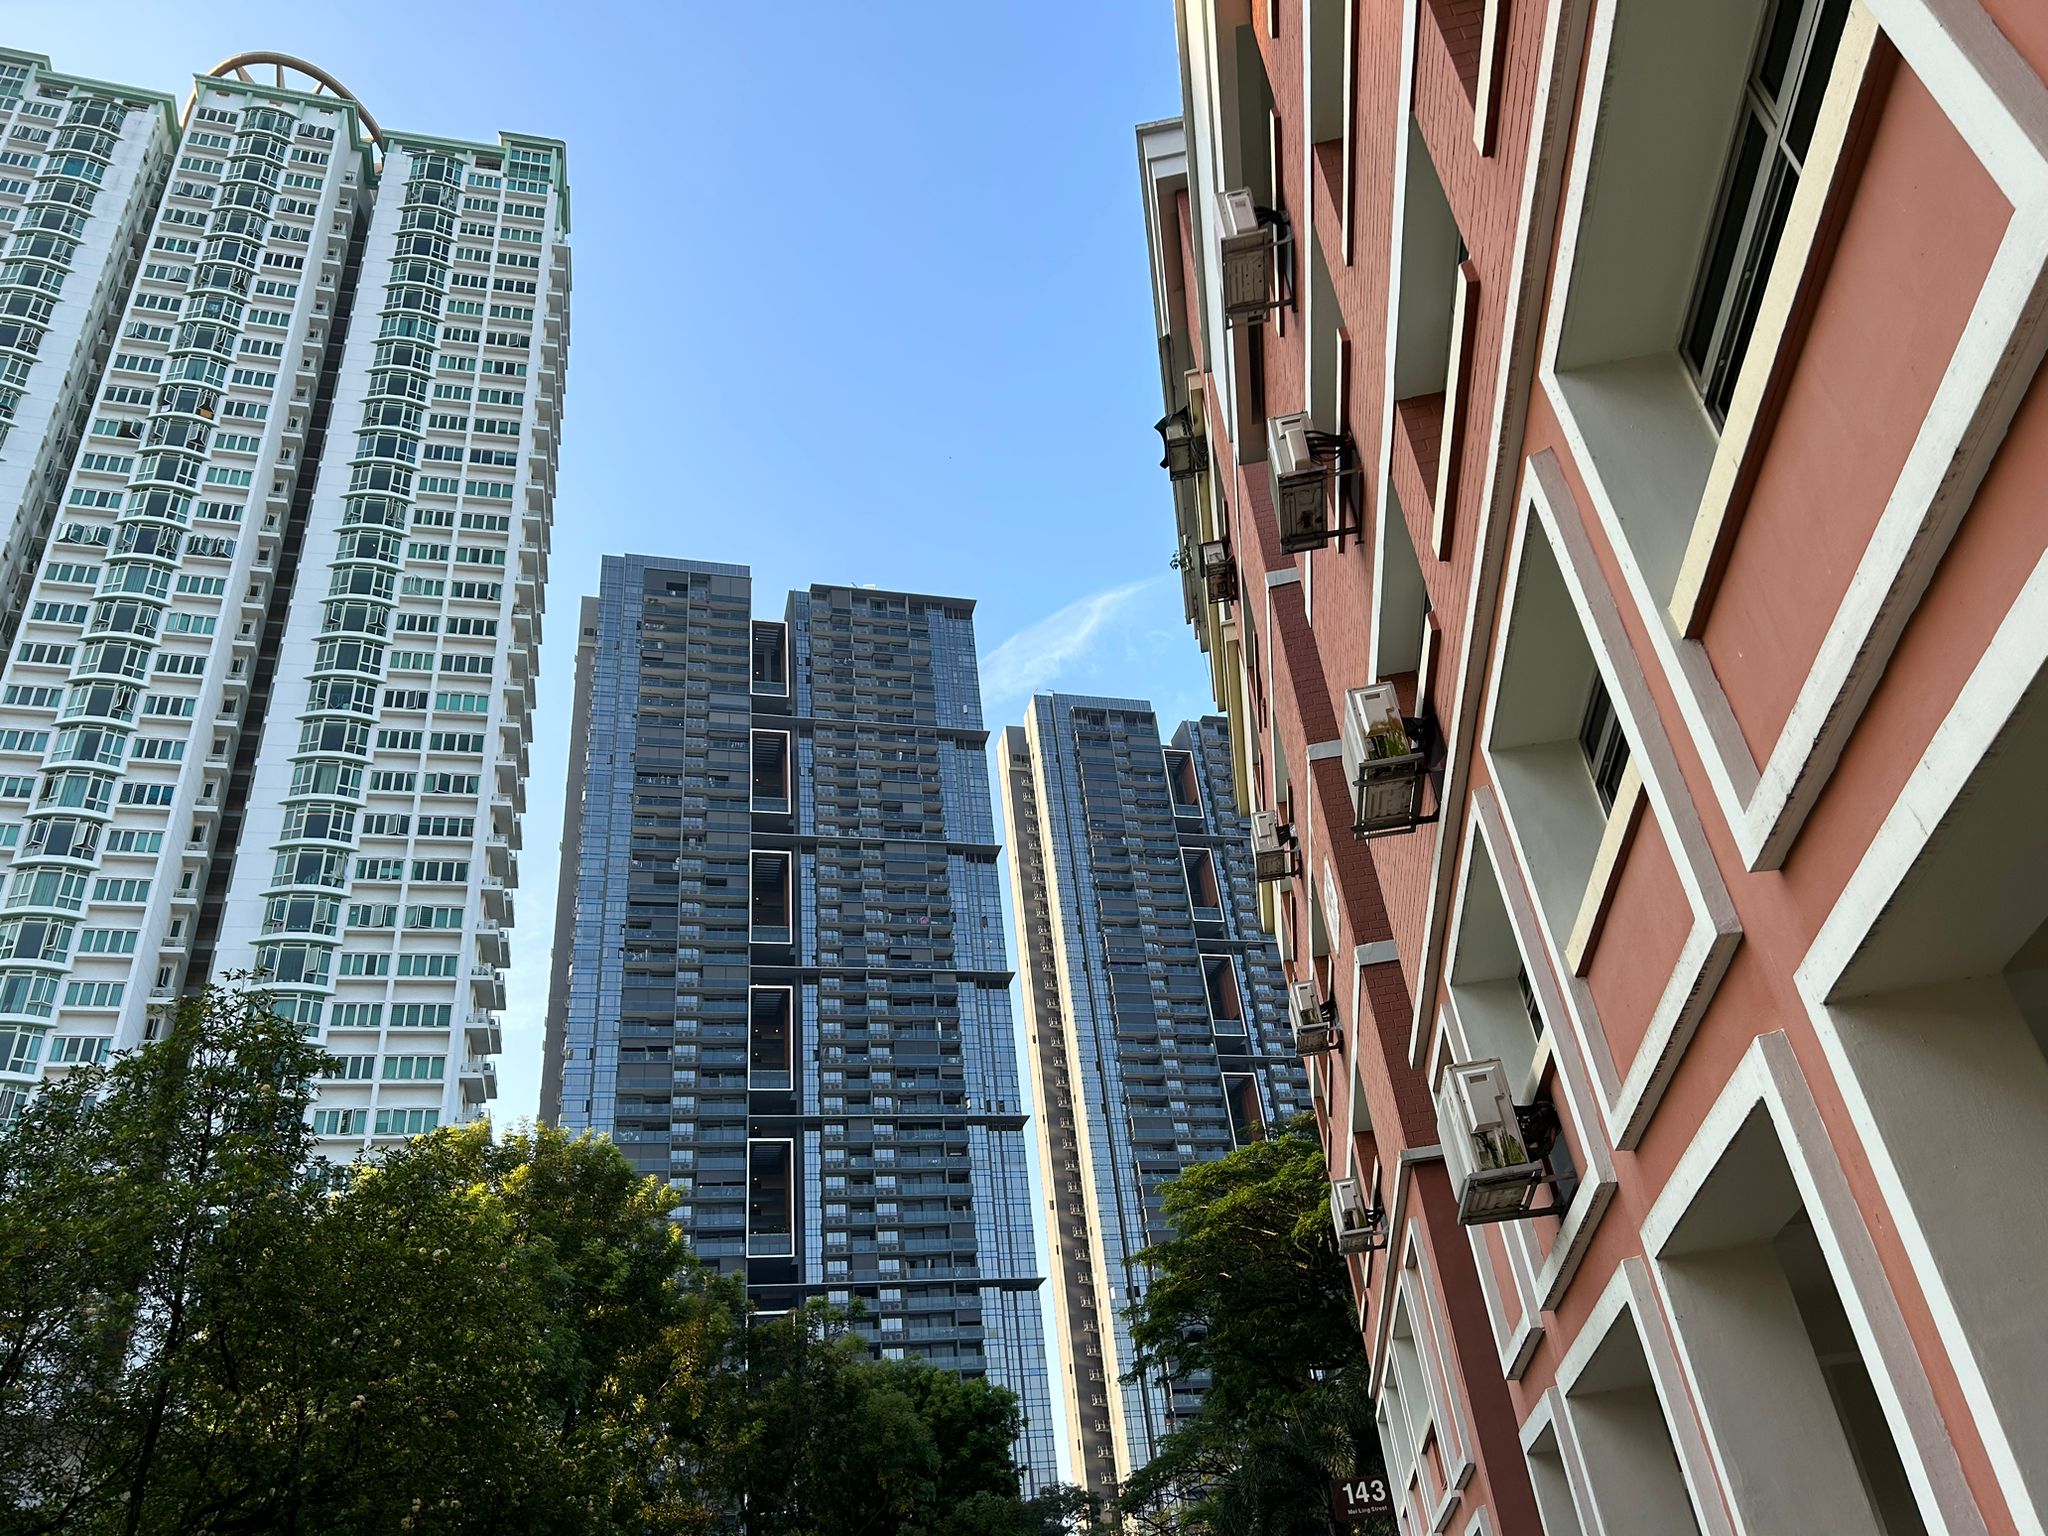 HDB frontground and Condo in the beackground